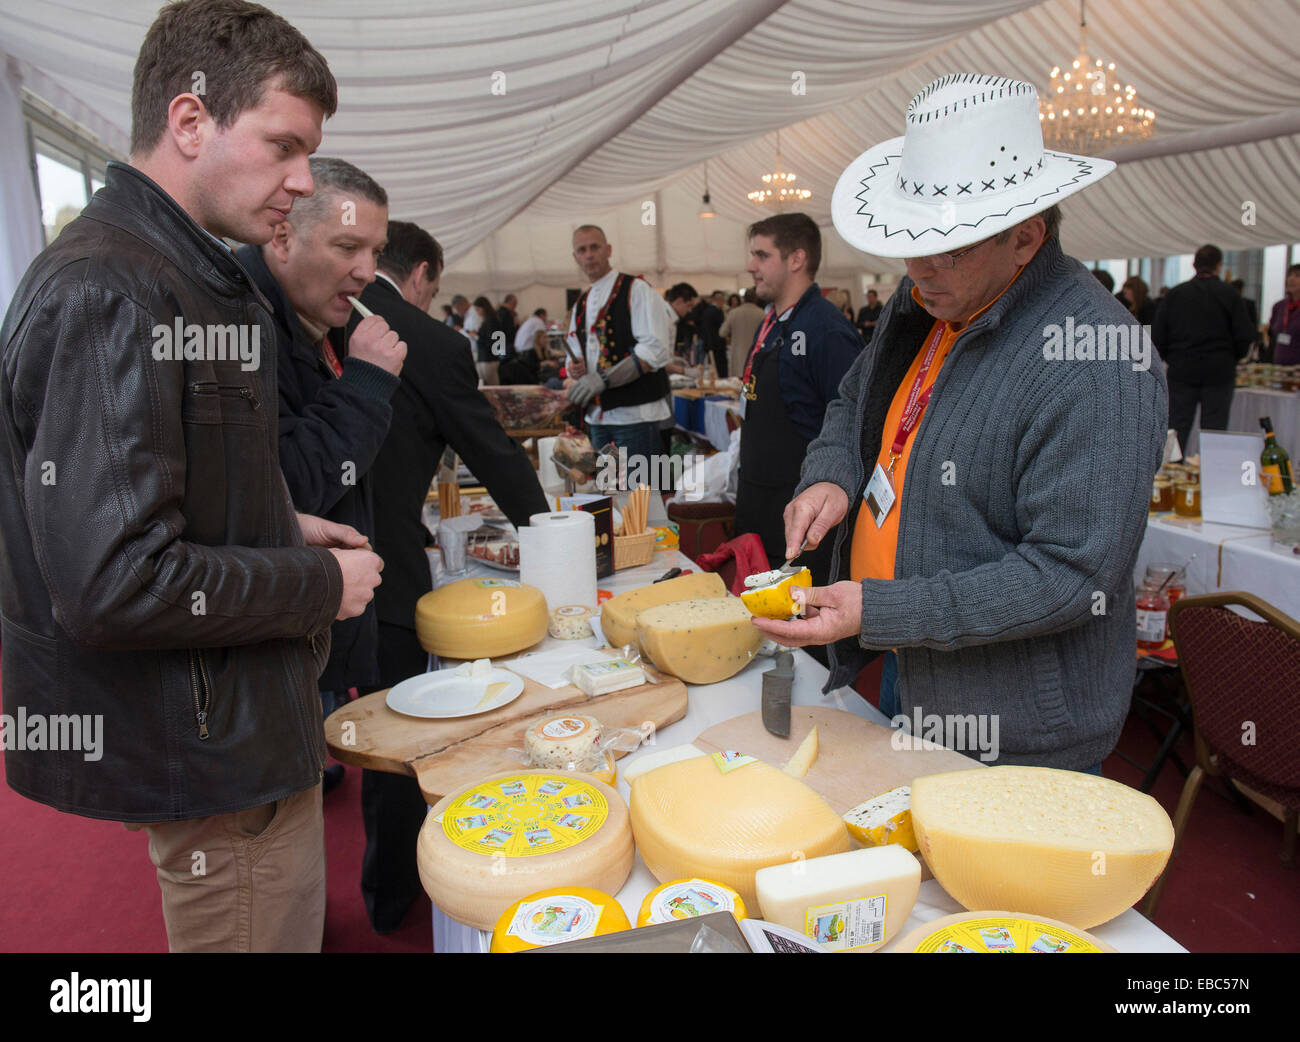 Zagreb, Croatia. 28th Nov, 2014. Visitors taste cheese during the 9th Zagreb VINOcom-International Festival of Wine and Culinary Art at the Esplanade hotel in Zagreb, capital of Croatia, Nov. 28, 2014. The two-day wine and food festival kicked off here on Friday with participation of more than 300 wine and food exhibitors from Croatia and nearby region. © Miso Lisanin/Xinhua/Alamy Live News Stock Photo